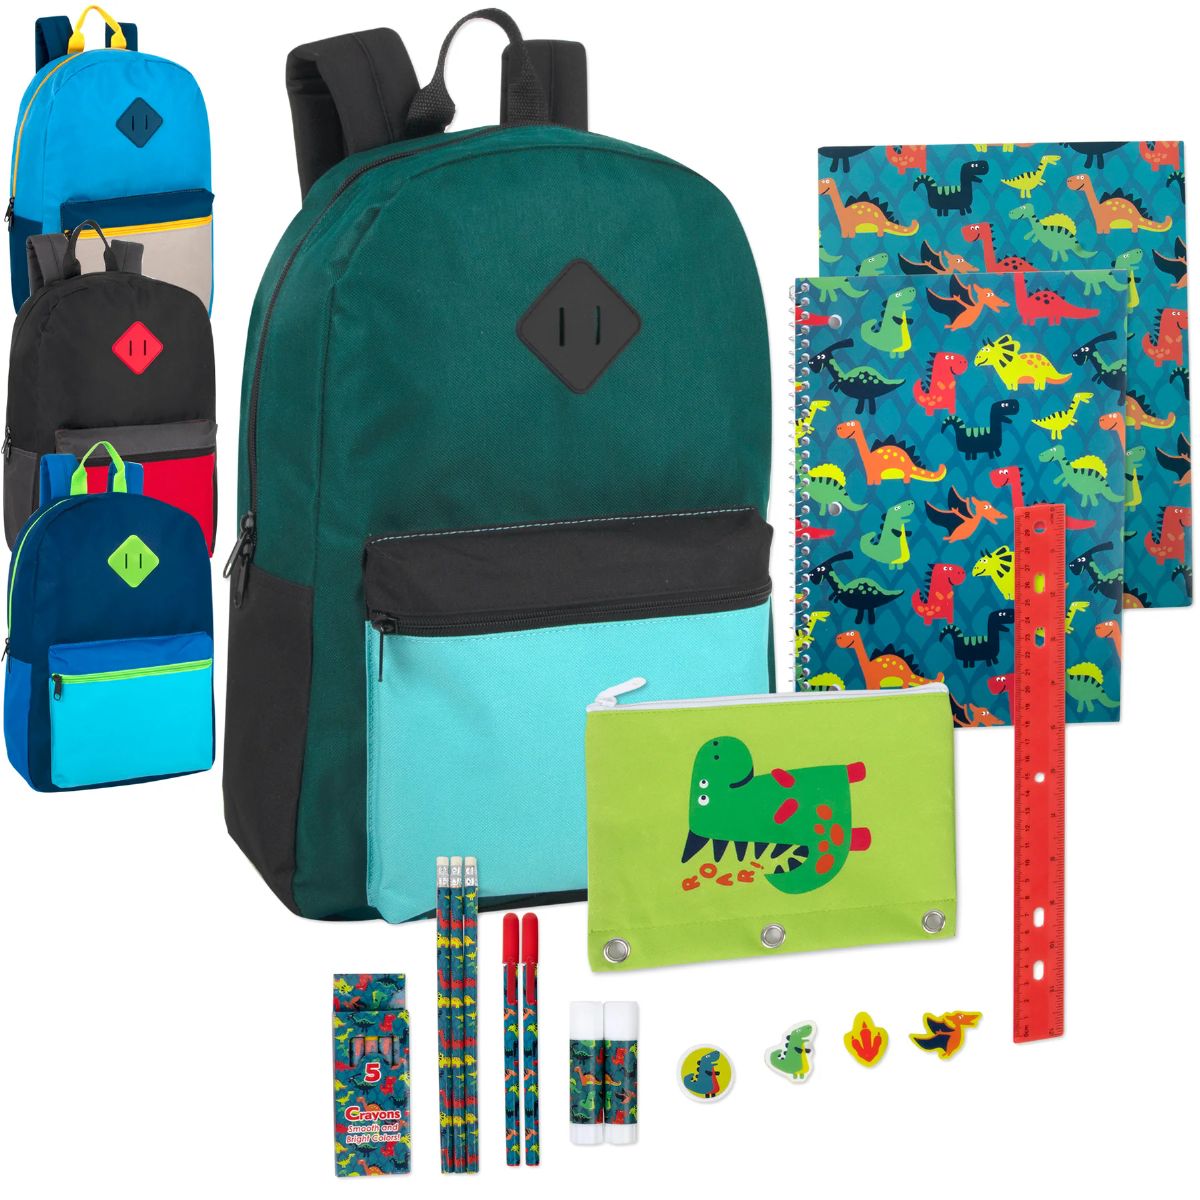 24 Pieces of 17" Multicolor Backpack With Themed 20-Piece School Supply Kit - Boys